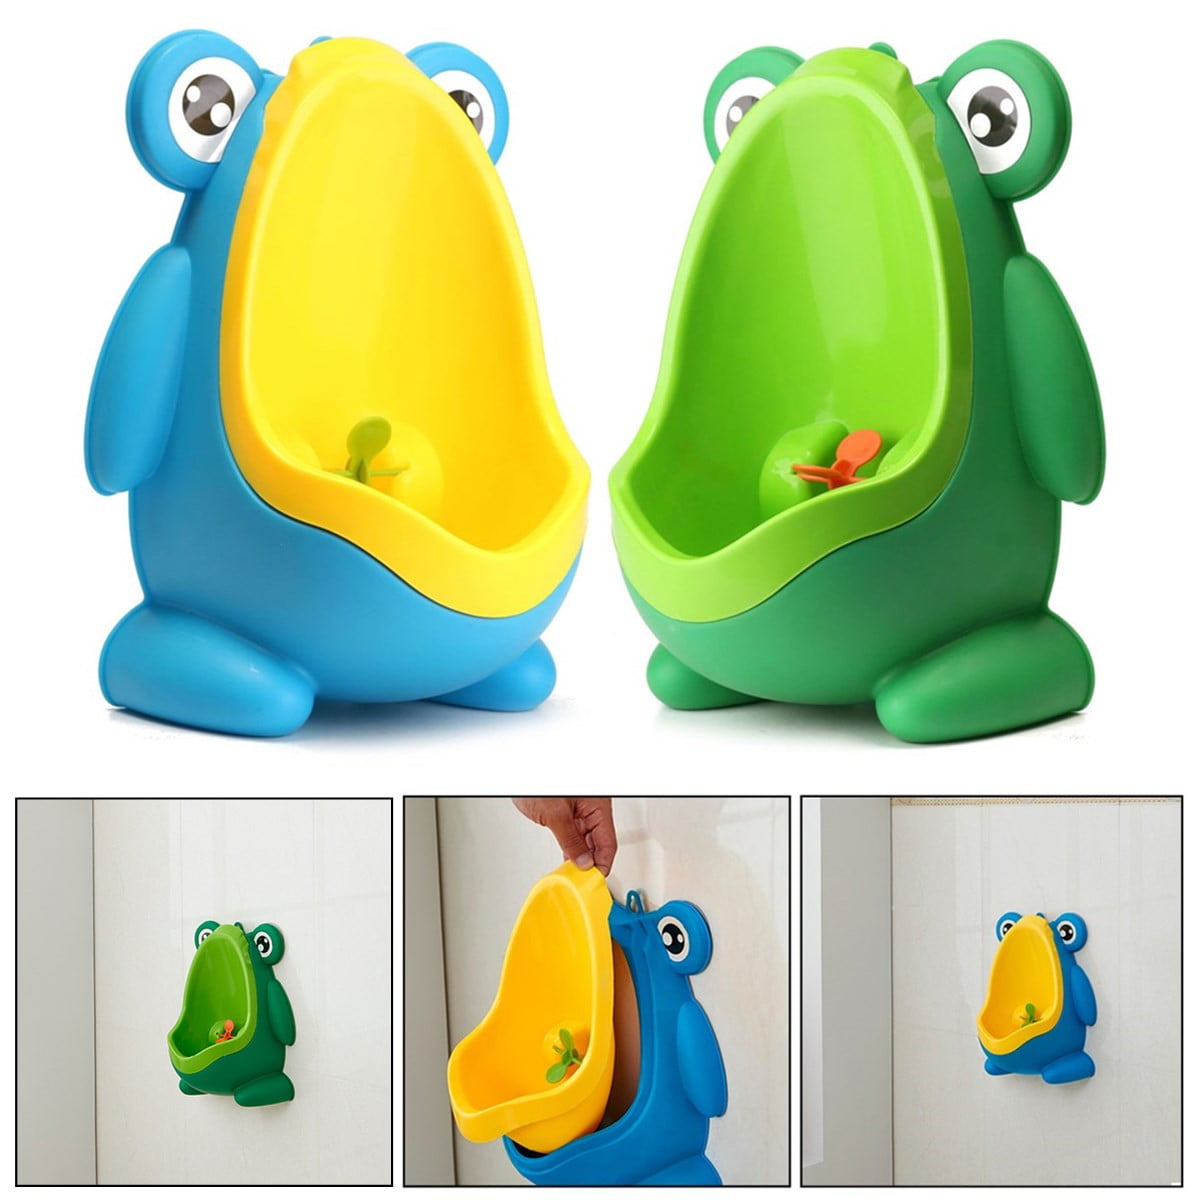 Lovely Frog Baby Toilet Training Children Potty Urinal Pee Trainer Urine for Boys with Funny Aiming Target Blue